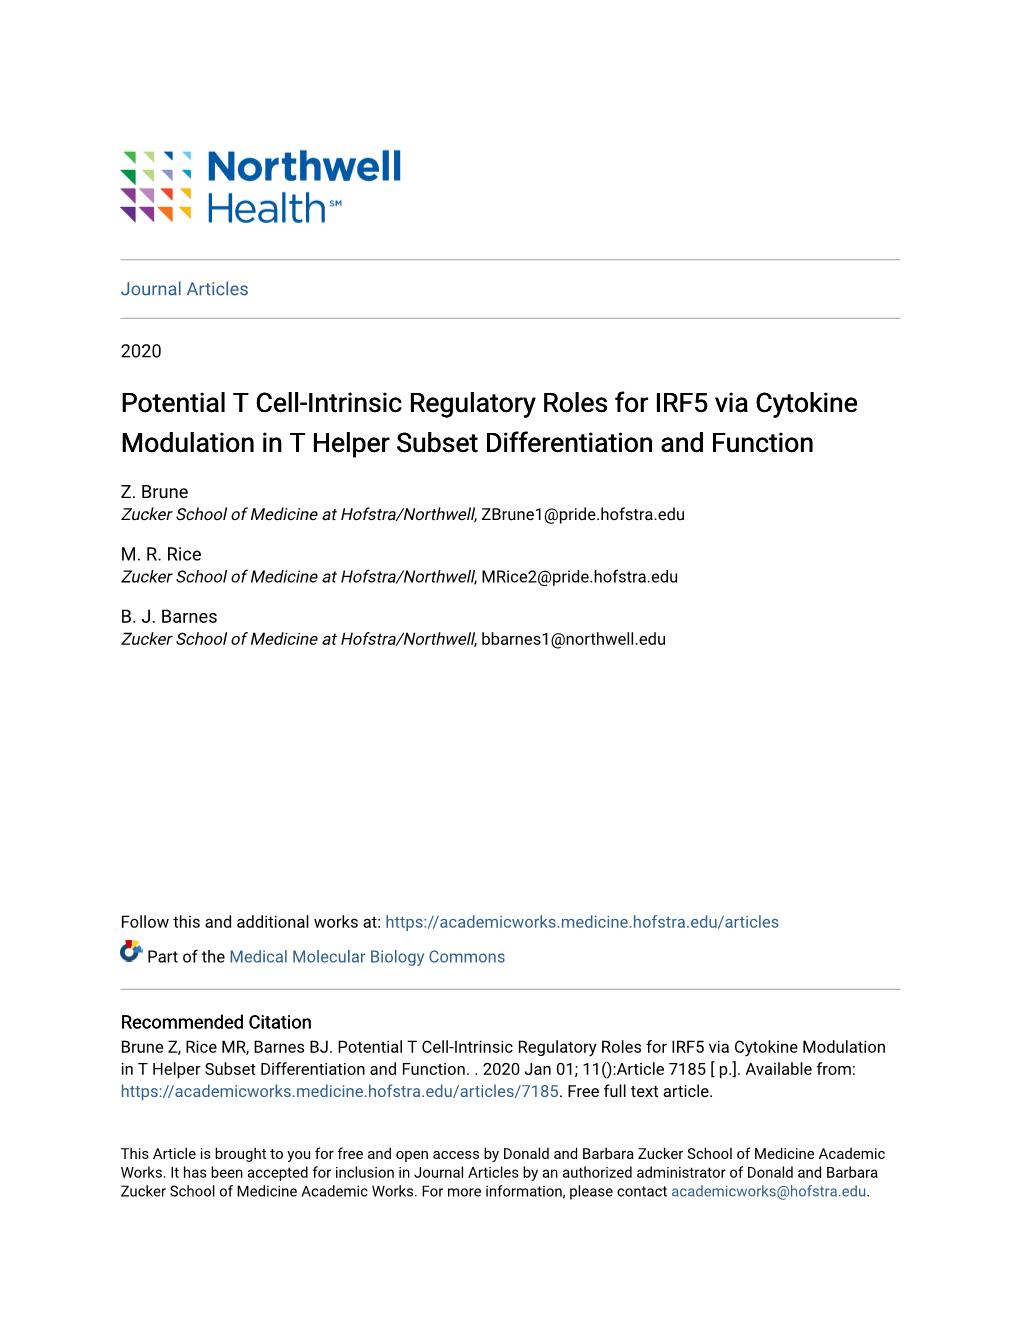 Potential T Cell-Intrinsic Regulatory Roles for IRF5 Via Cytokine Modulation in T Helper Subset Differentiation and Function